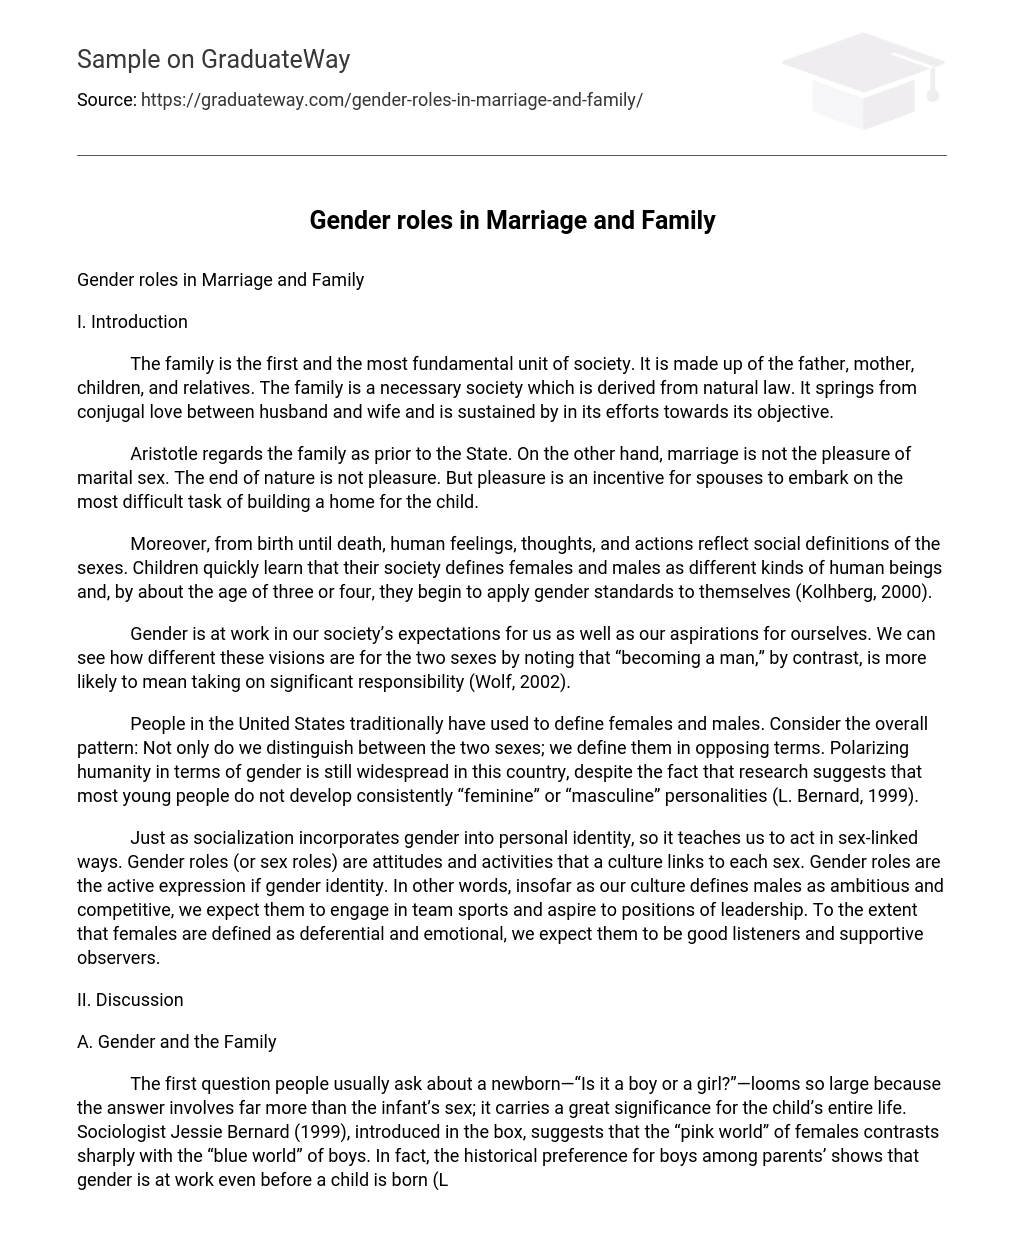 Gender roles in Marriage and Family